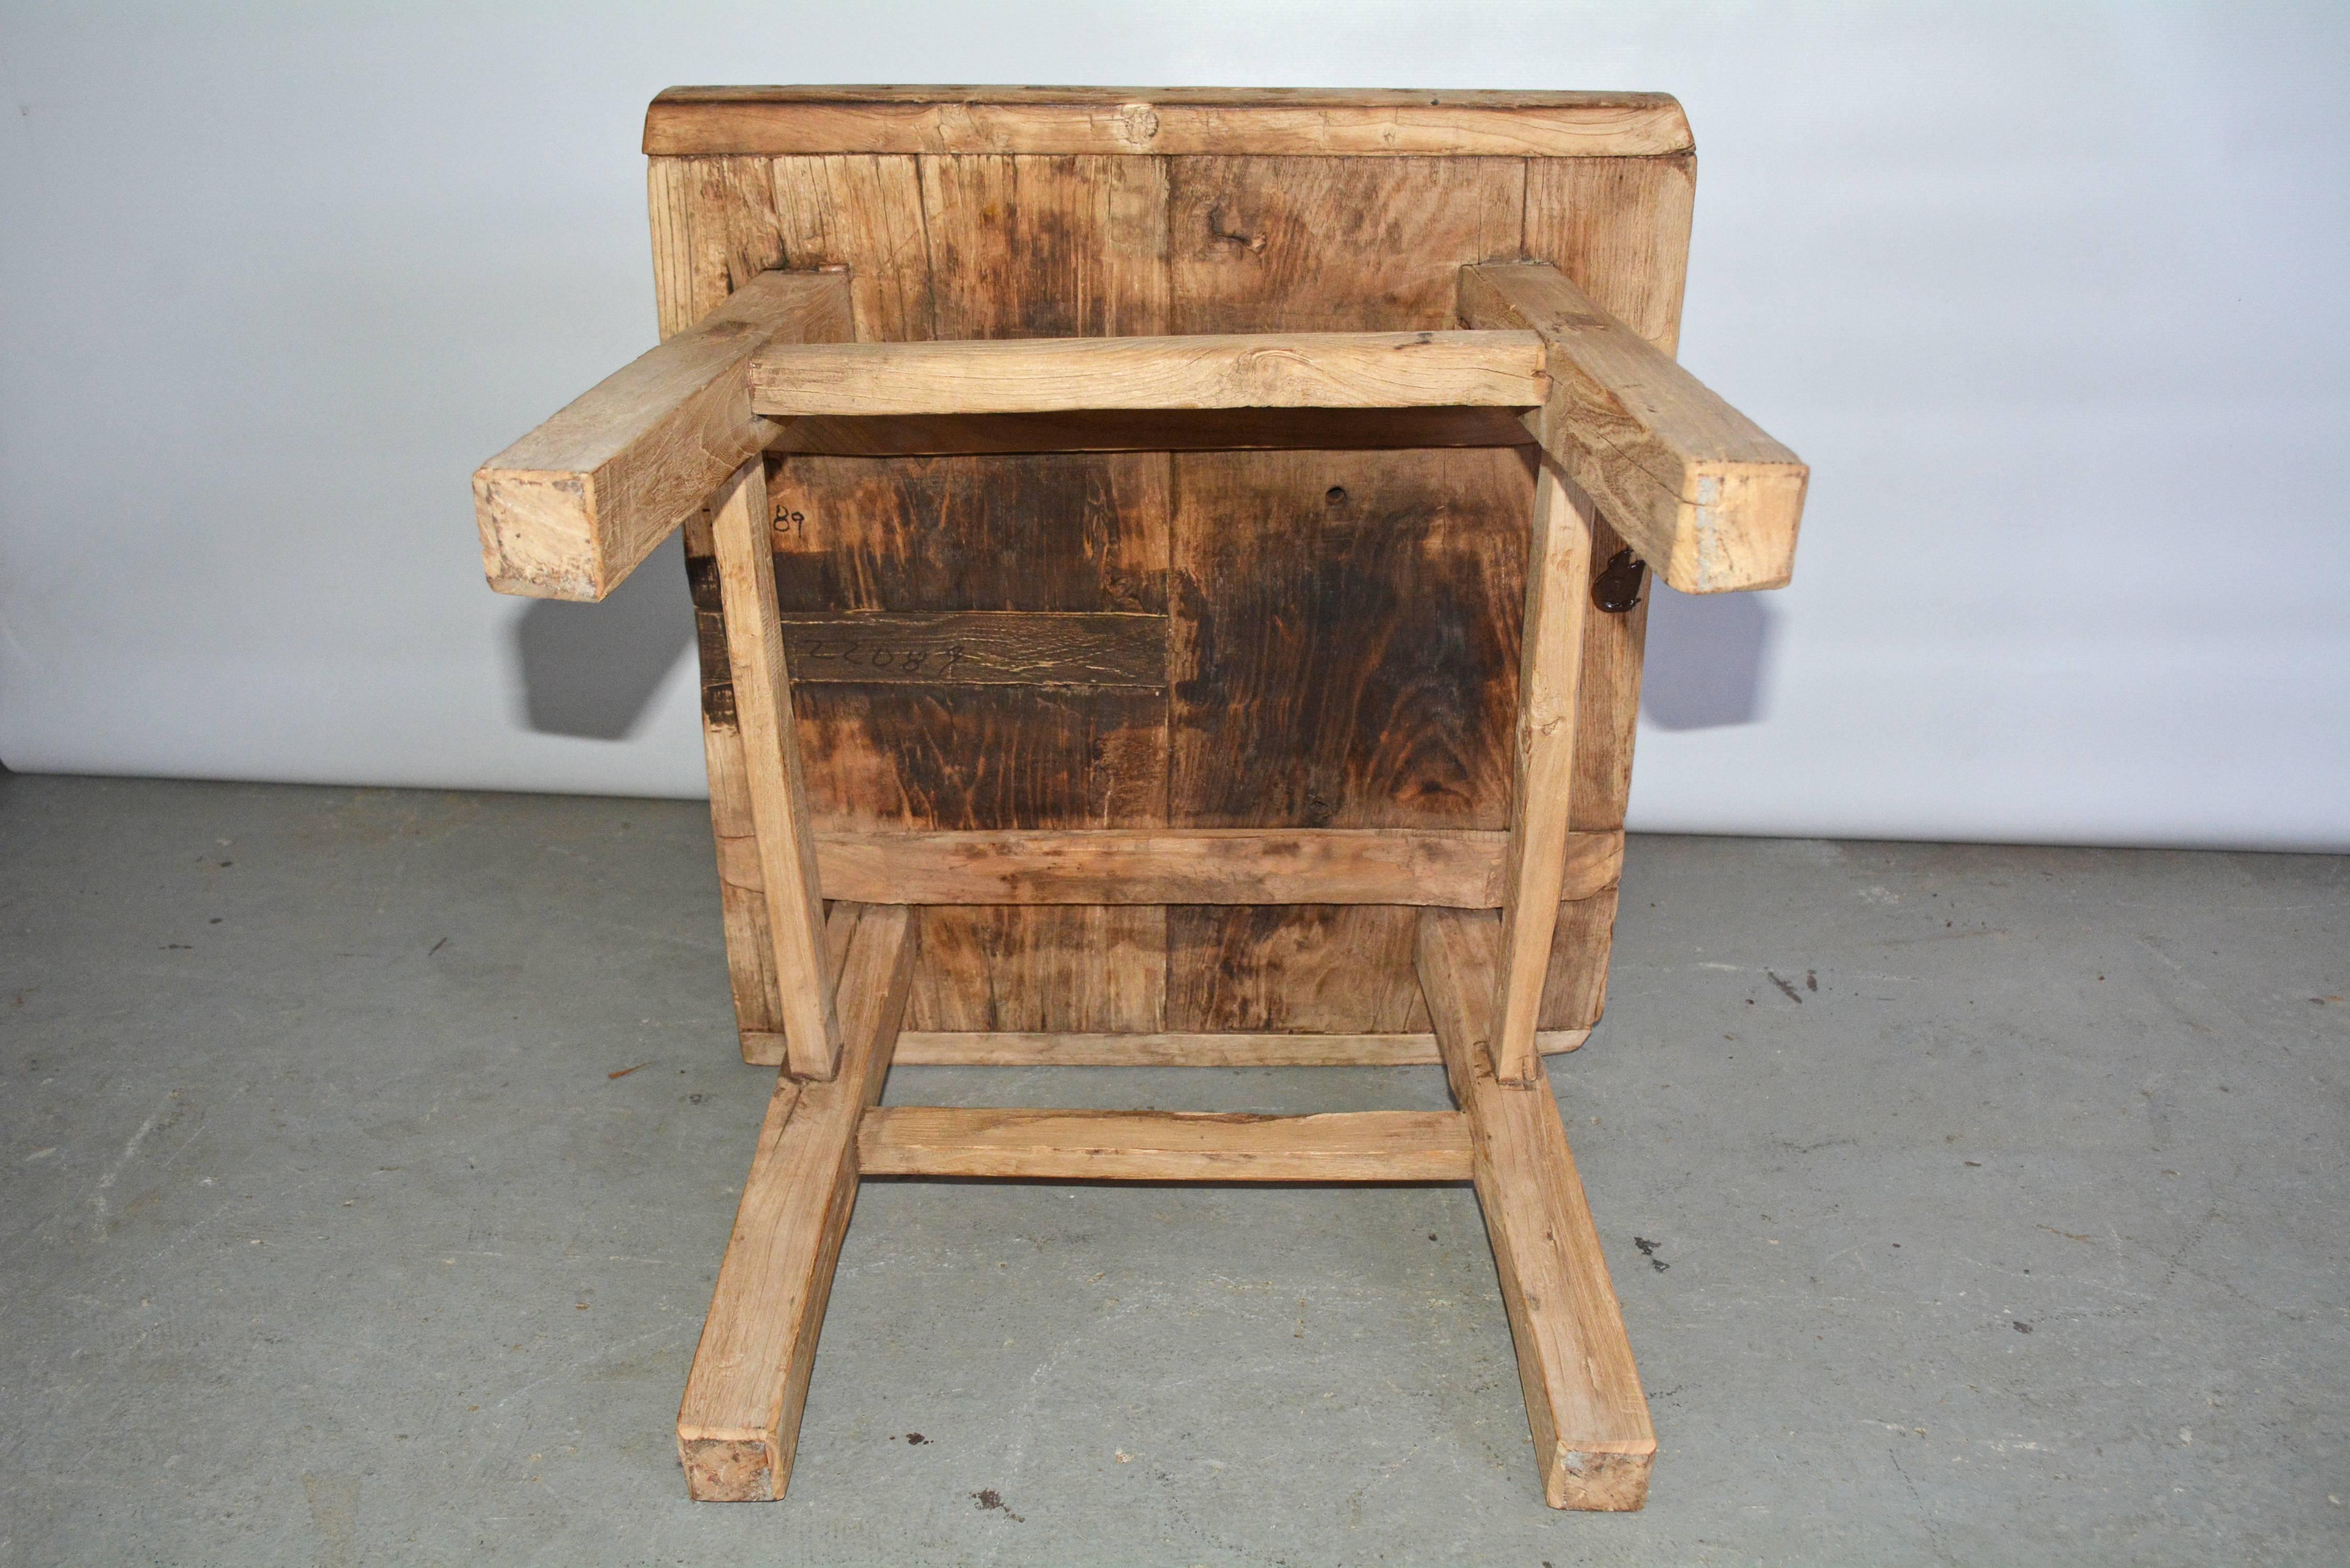 Hand-Crafted Rustic Indoor or Outdoor Coffee or Side Table